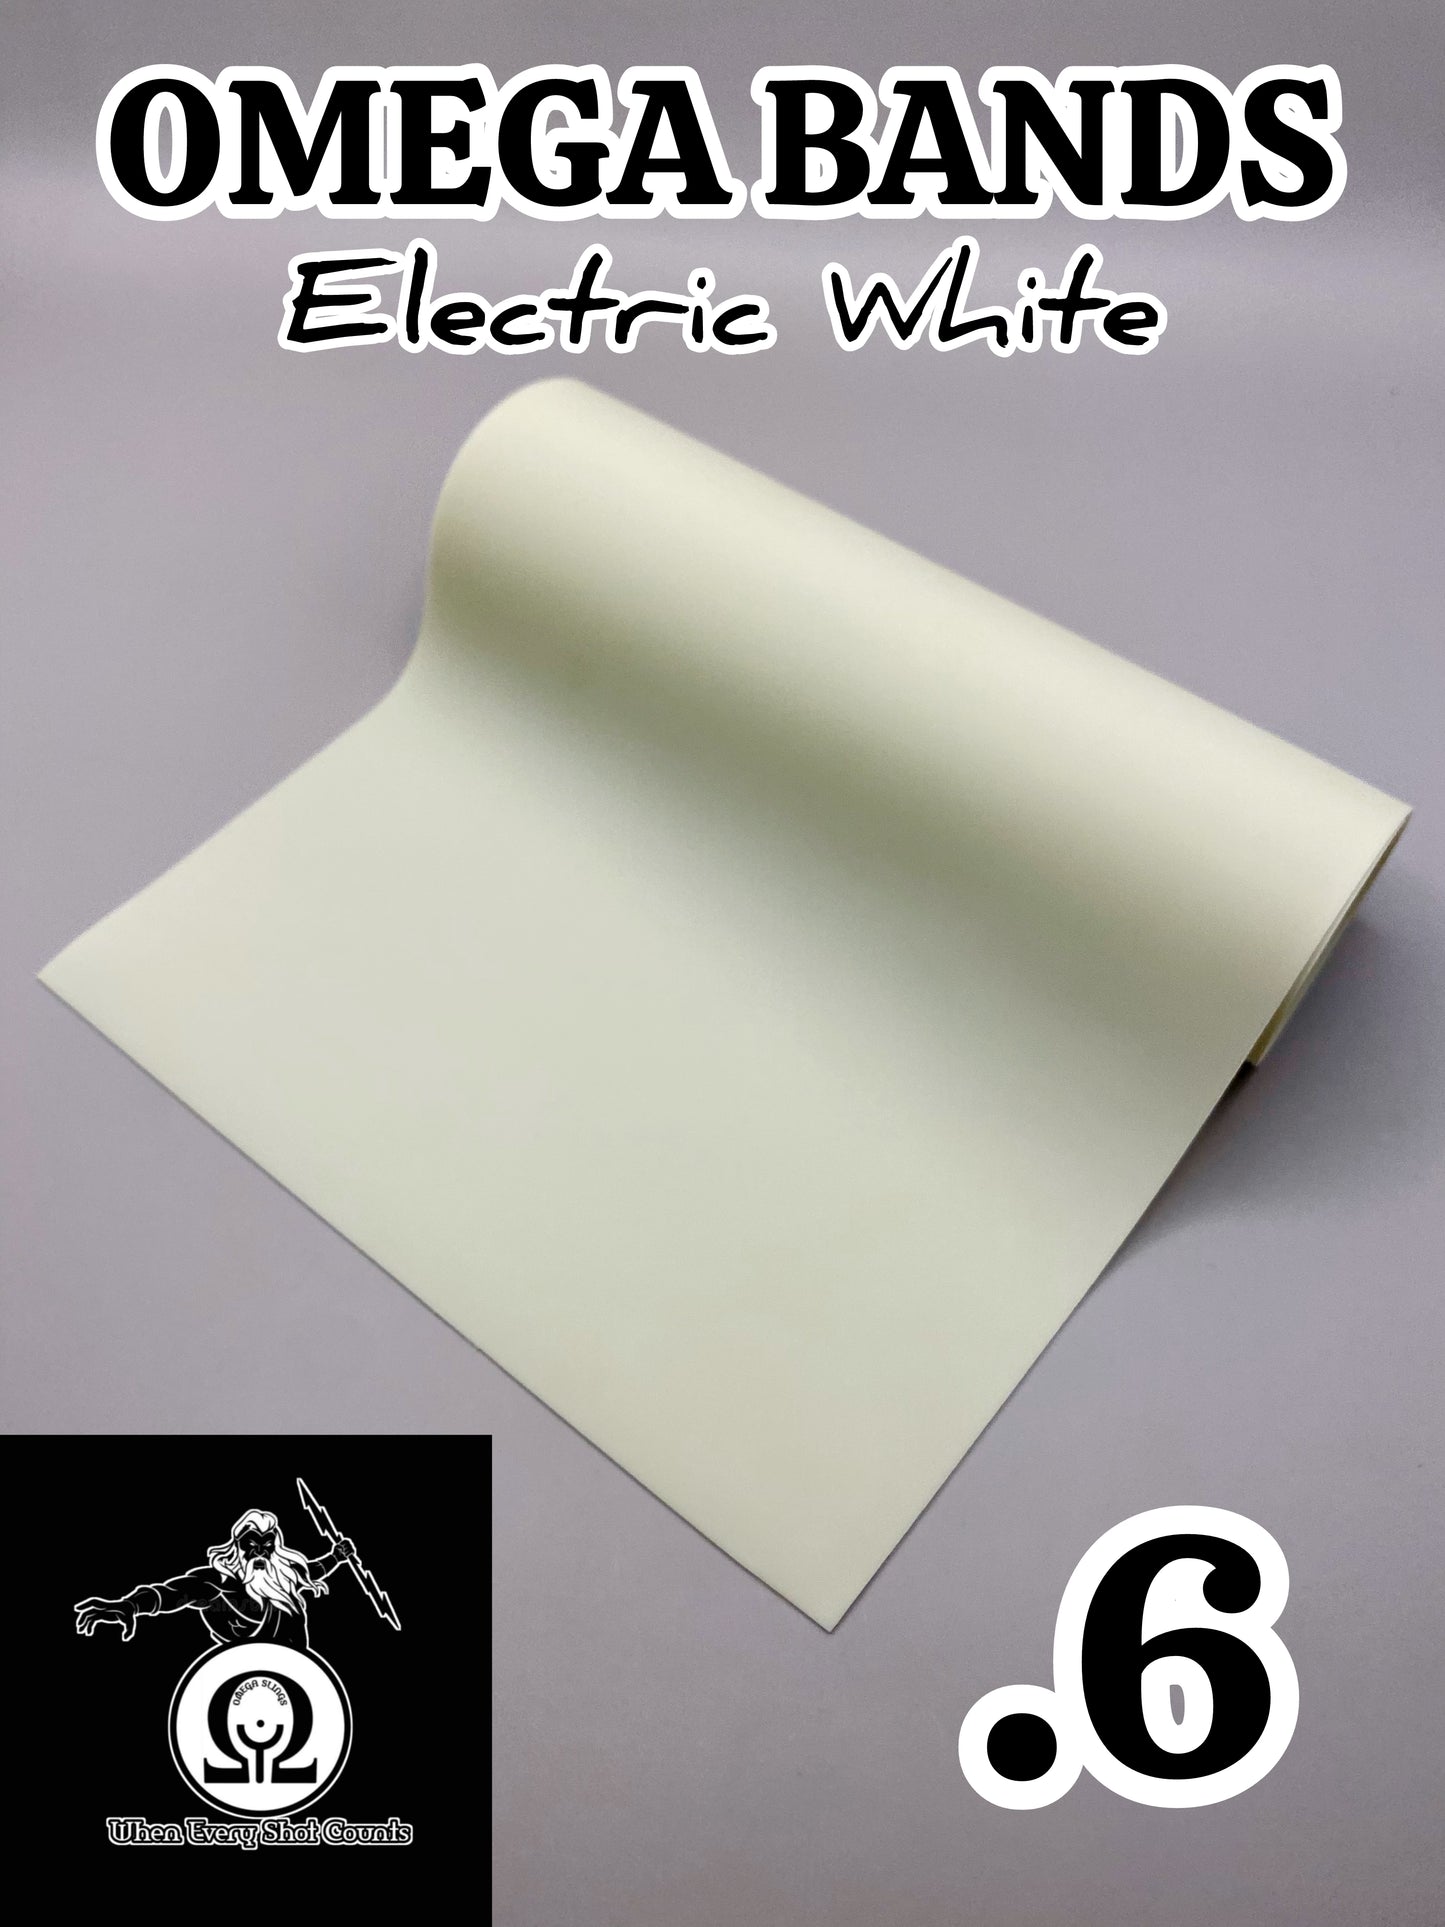 OMEGA BANDS- Electric White